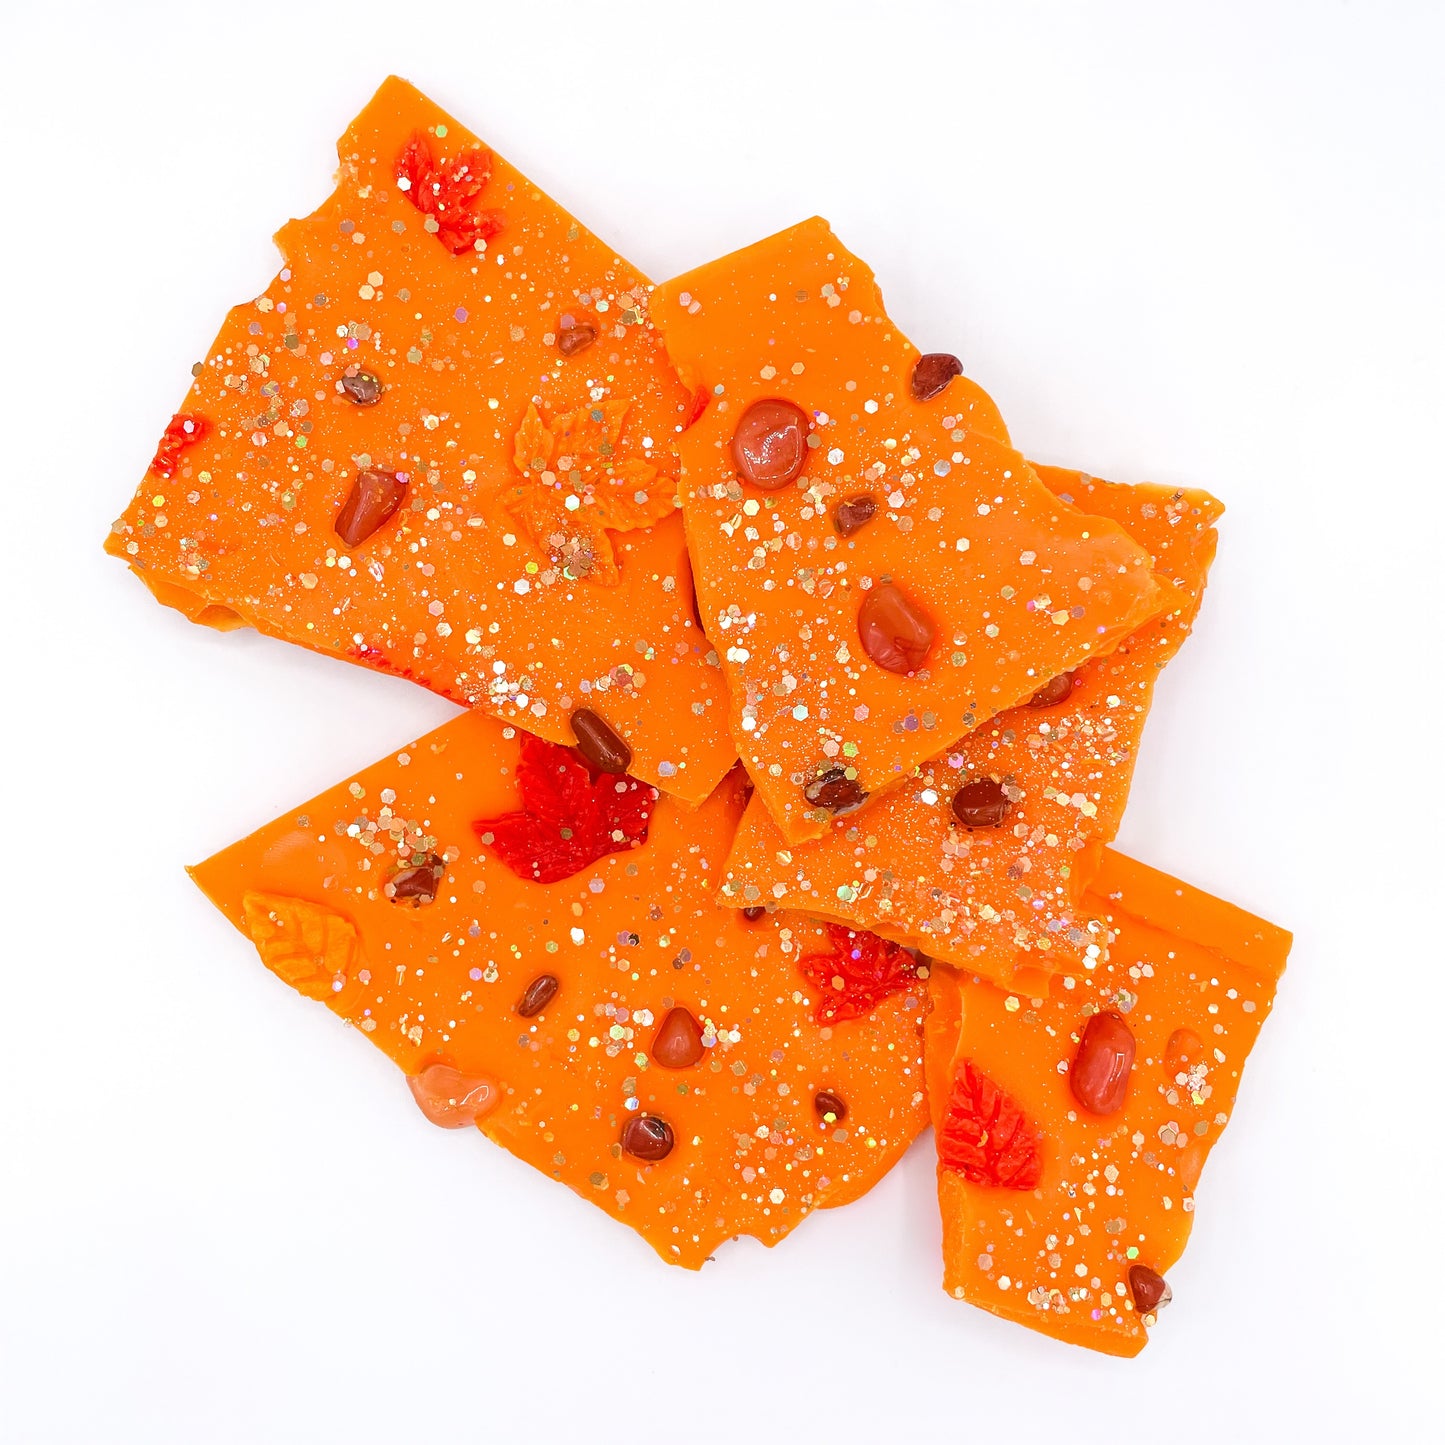 Crystal infused wax brittle